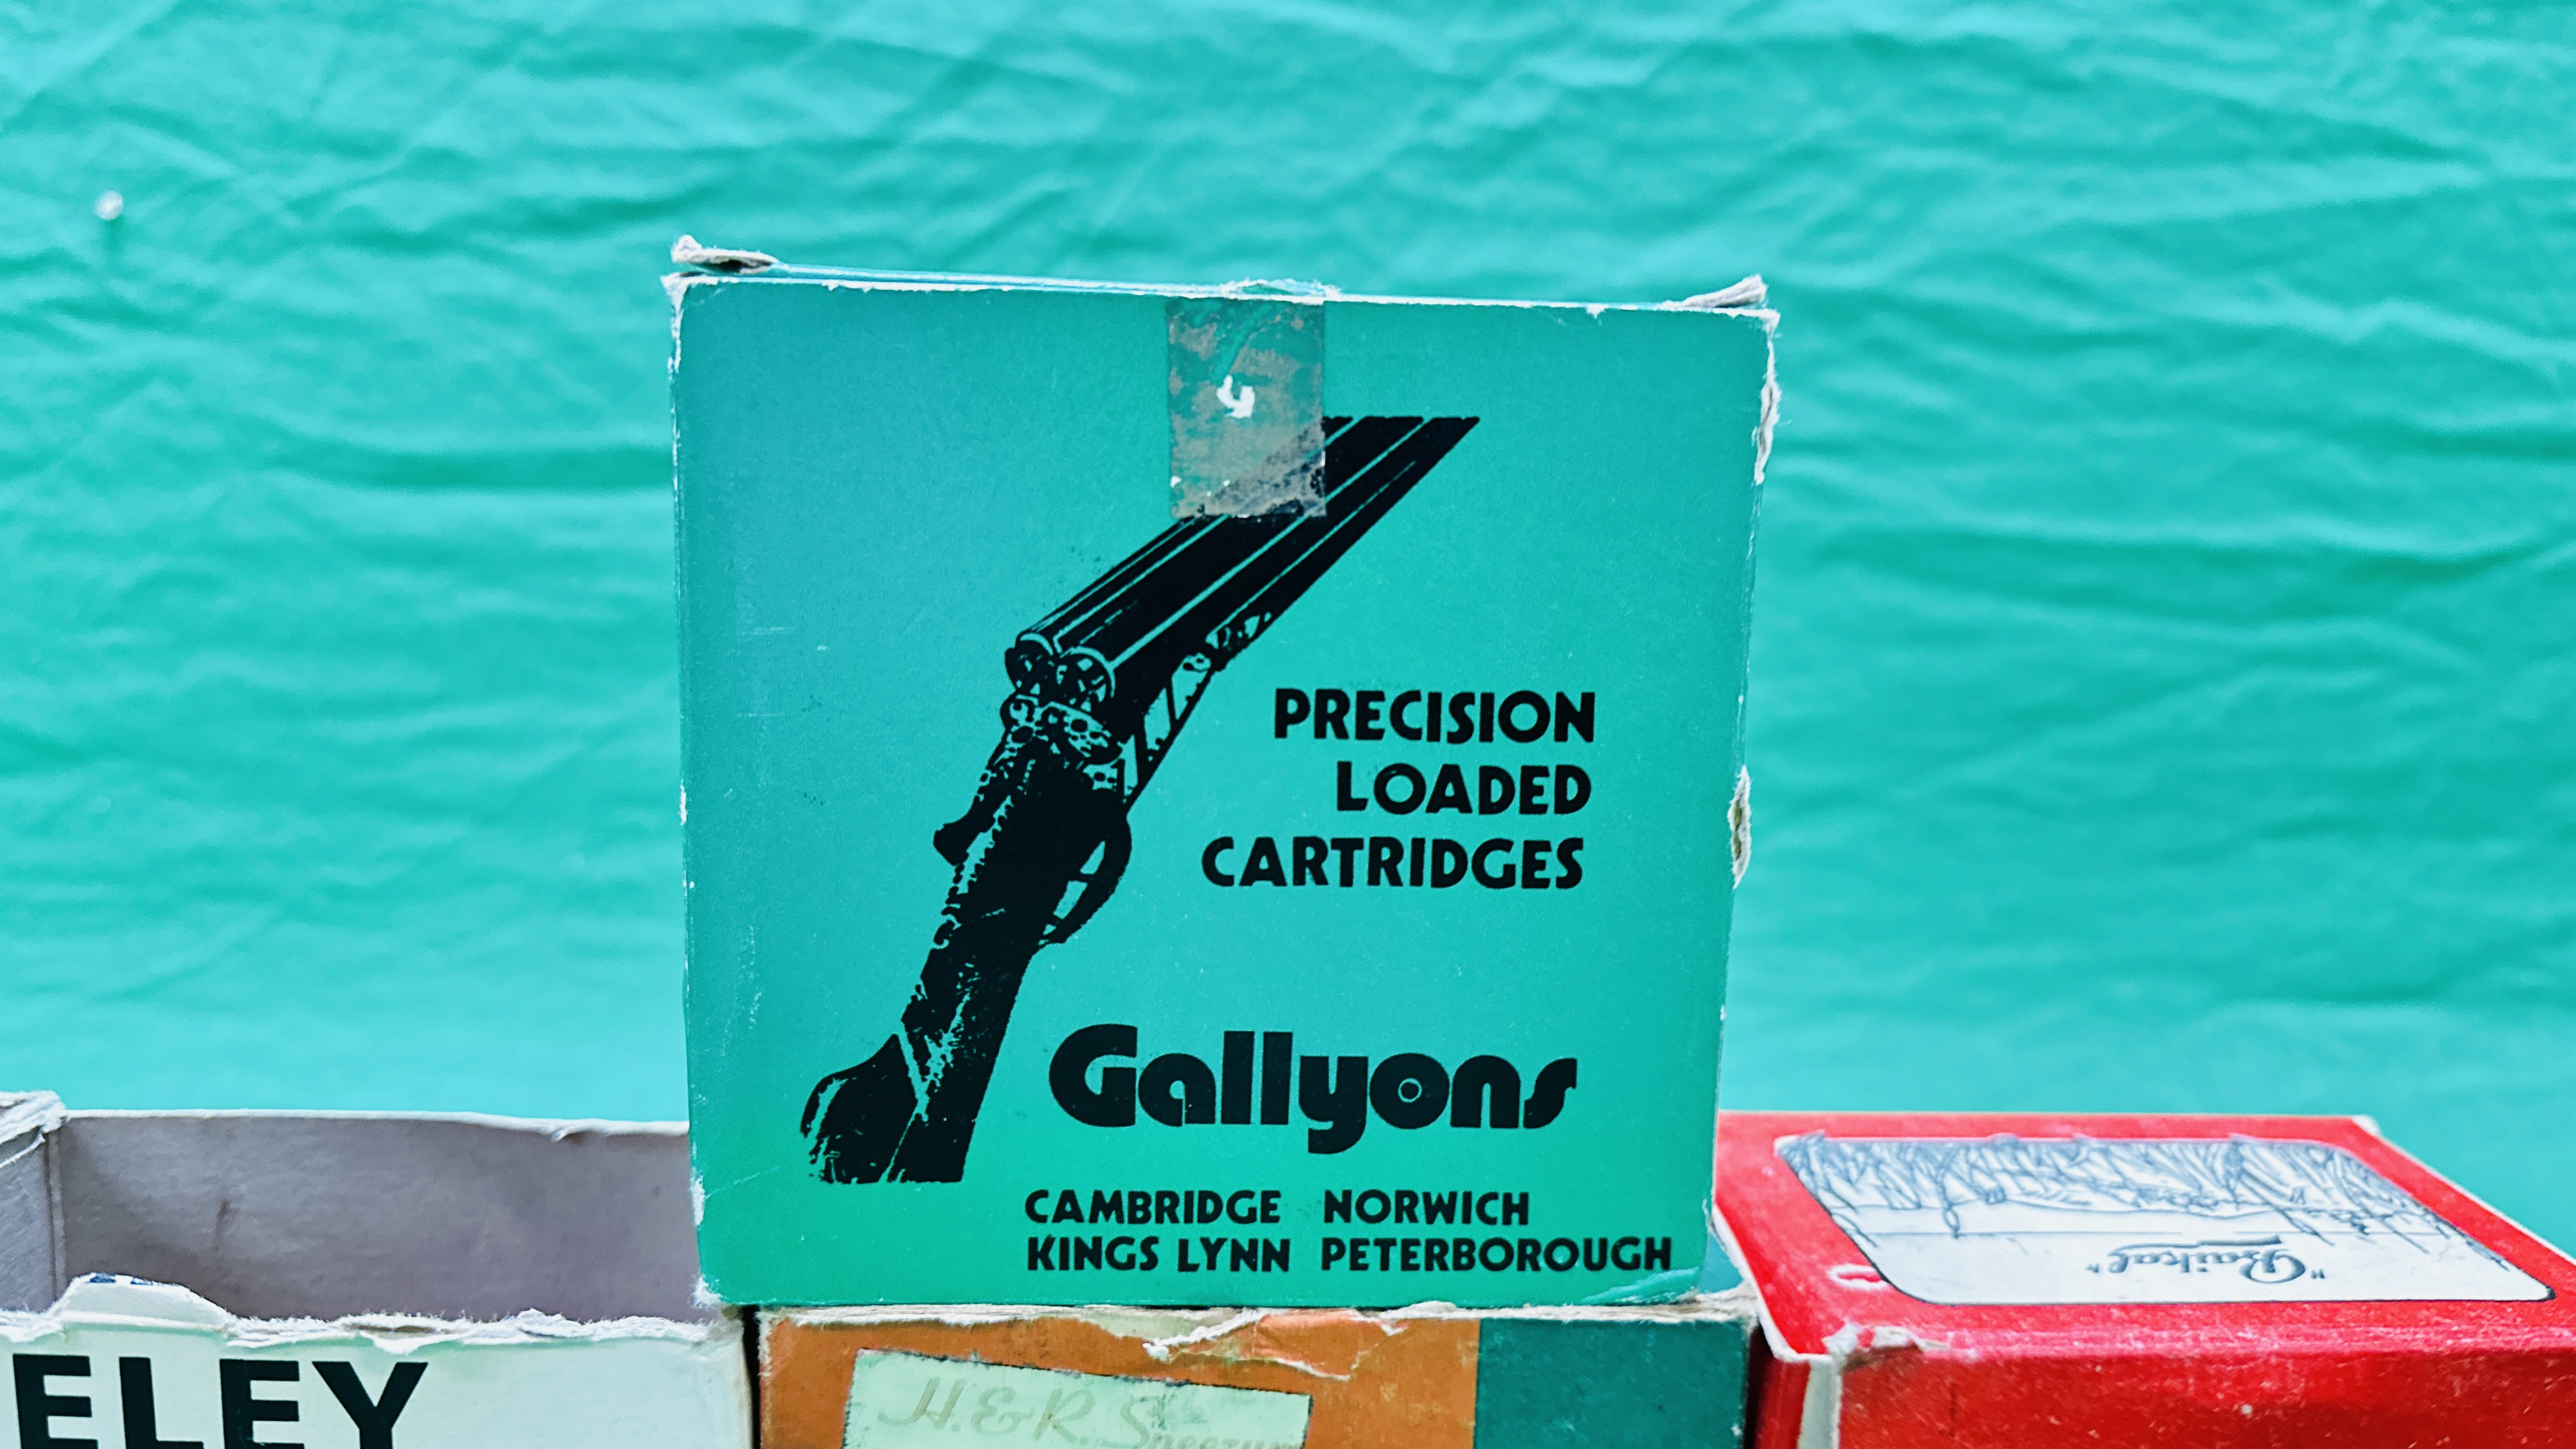 128 X MIXED 12 GAUGE CARTRIDGES INCLUDING COLLECTORS THREE CROWNS, HULL CARTRIDGE, GALLYONS, - Image 2 of 7